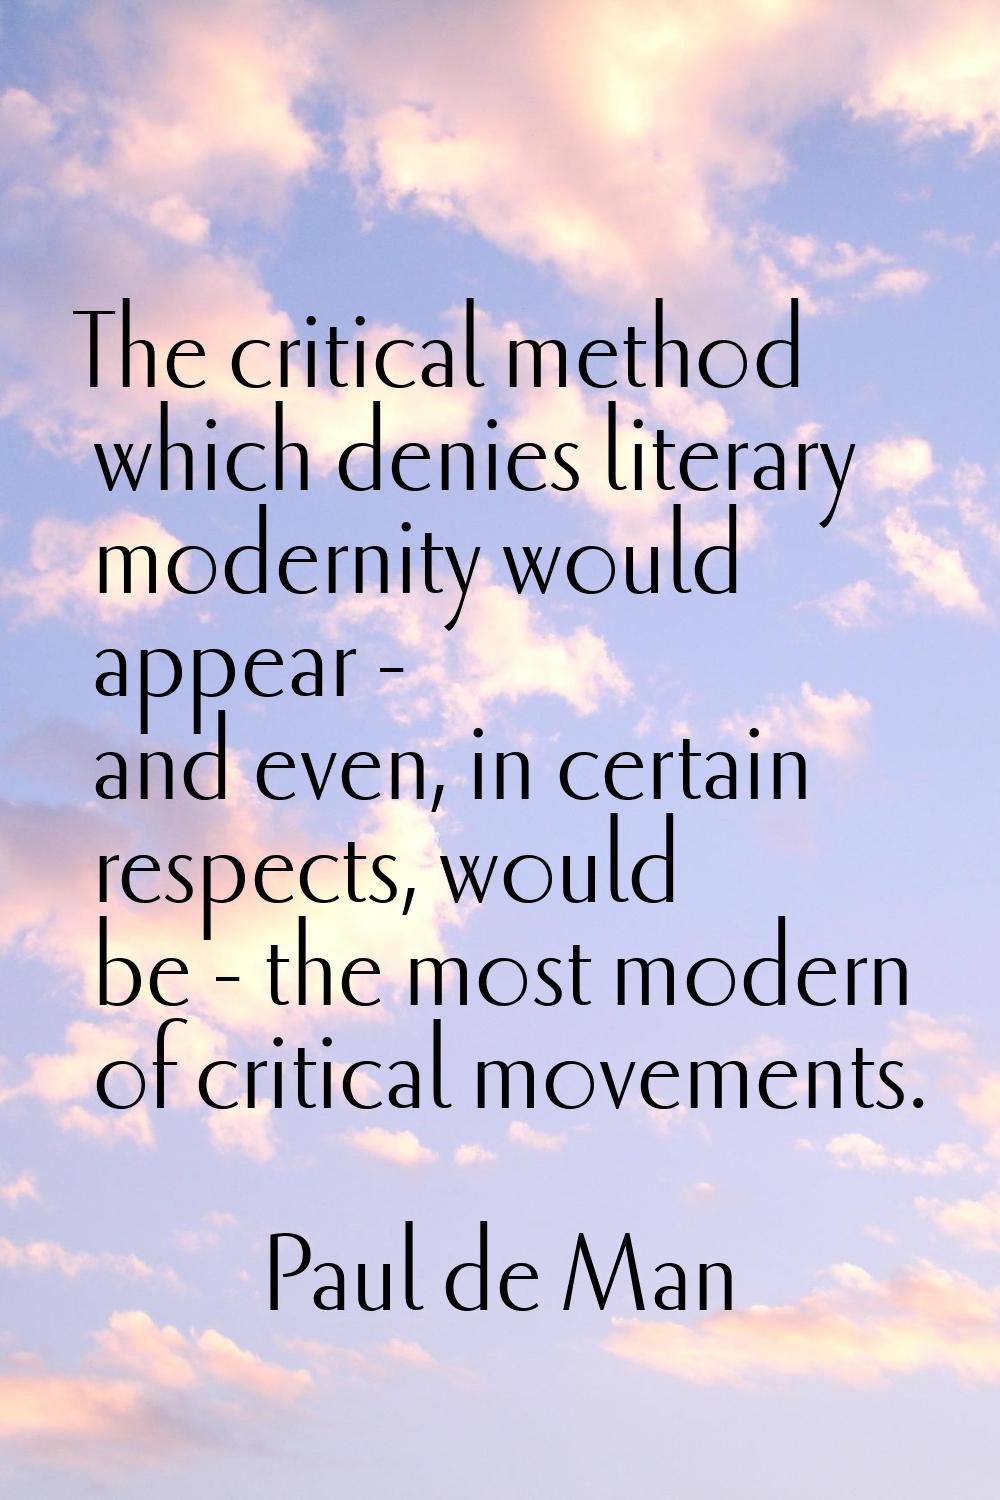 The critical method which denies literary modernity would appear - and even, in certain respects, w